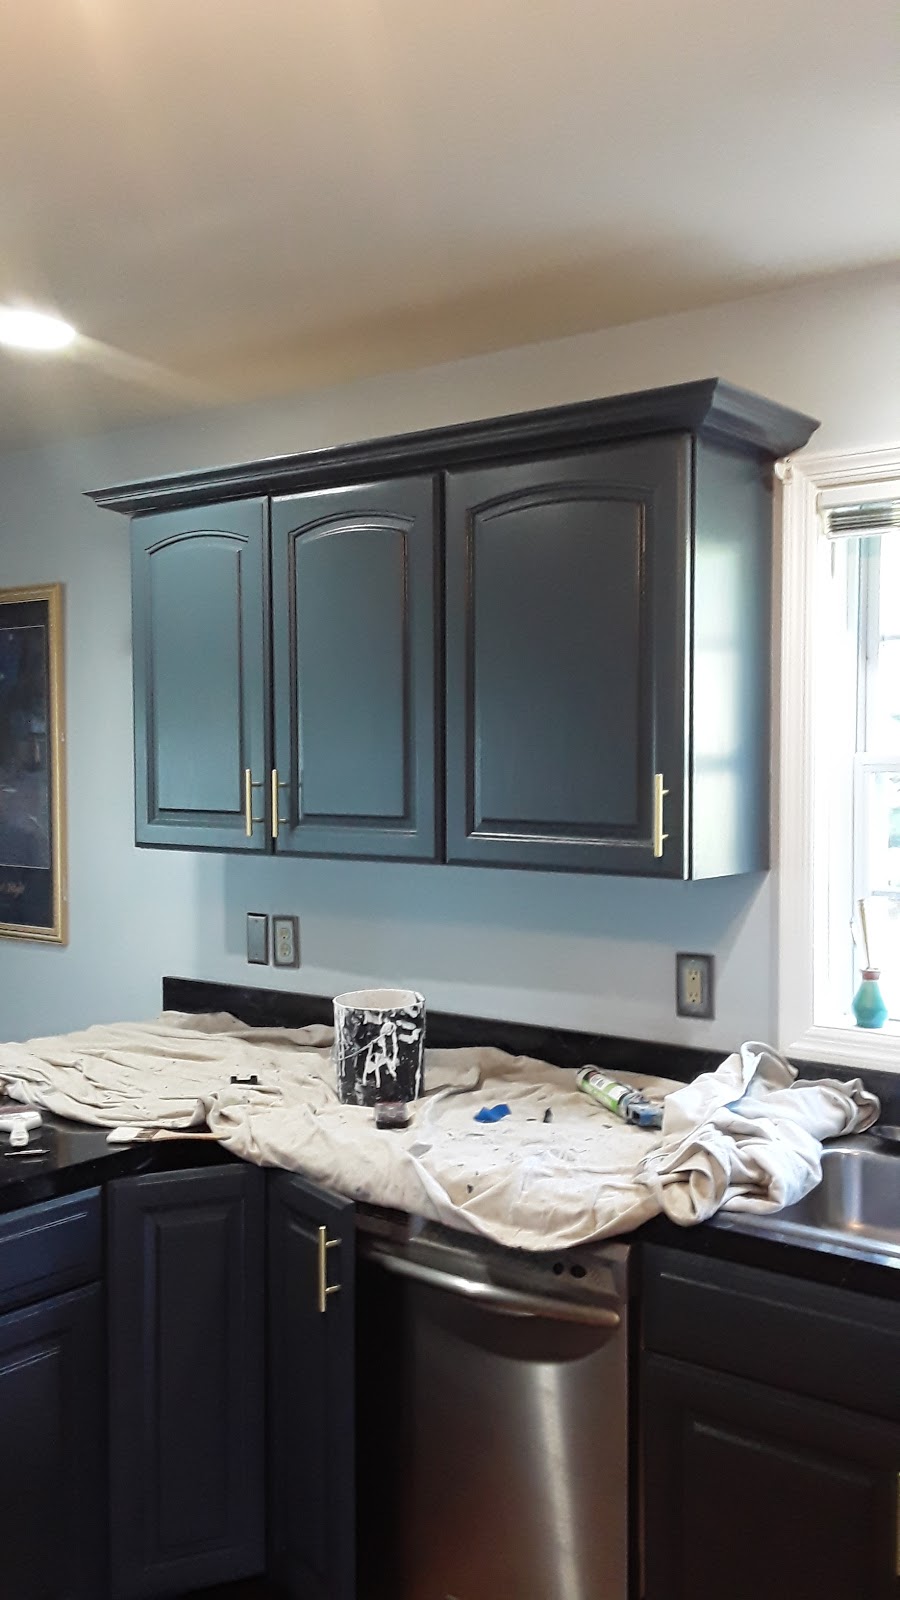 Woodhouse Painting and Restorations | 38 Summersweet Dr, Poughkeepsie, NY 12603 | Phone: (845) 366-0285